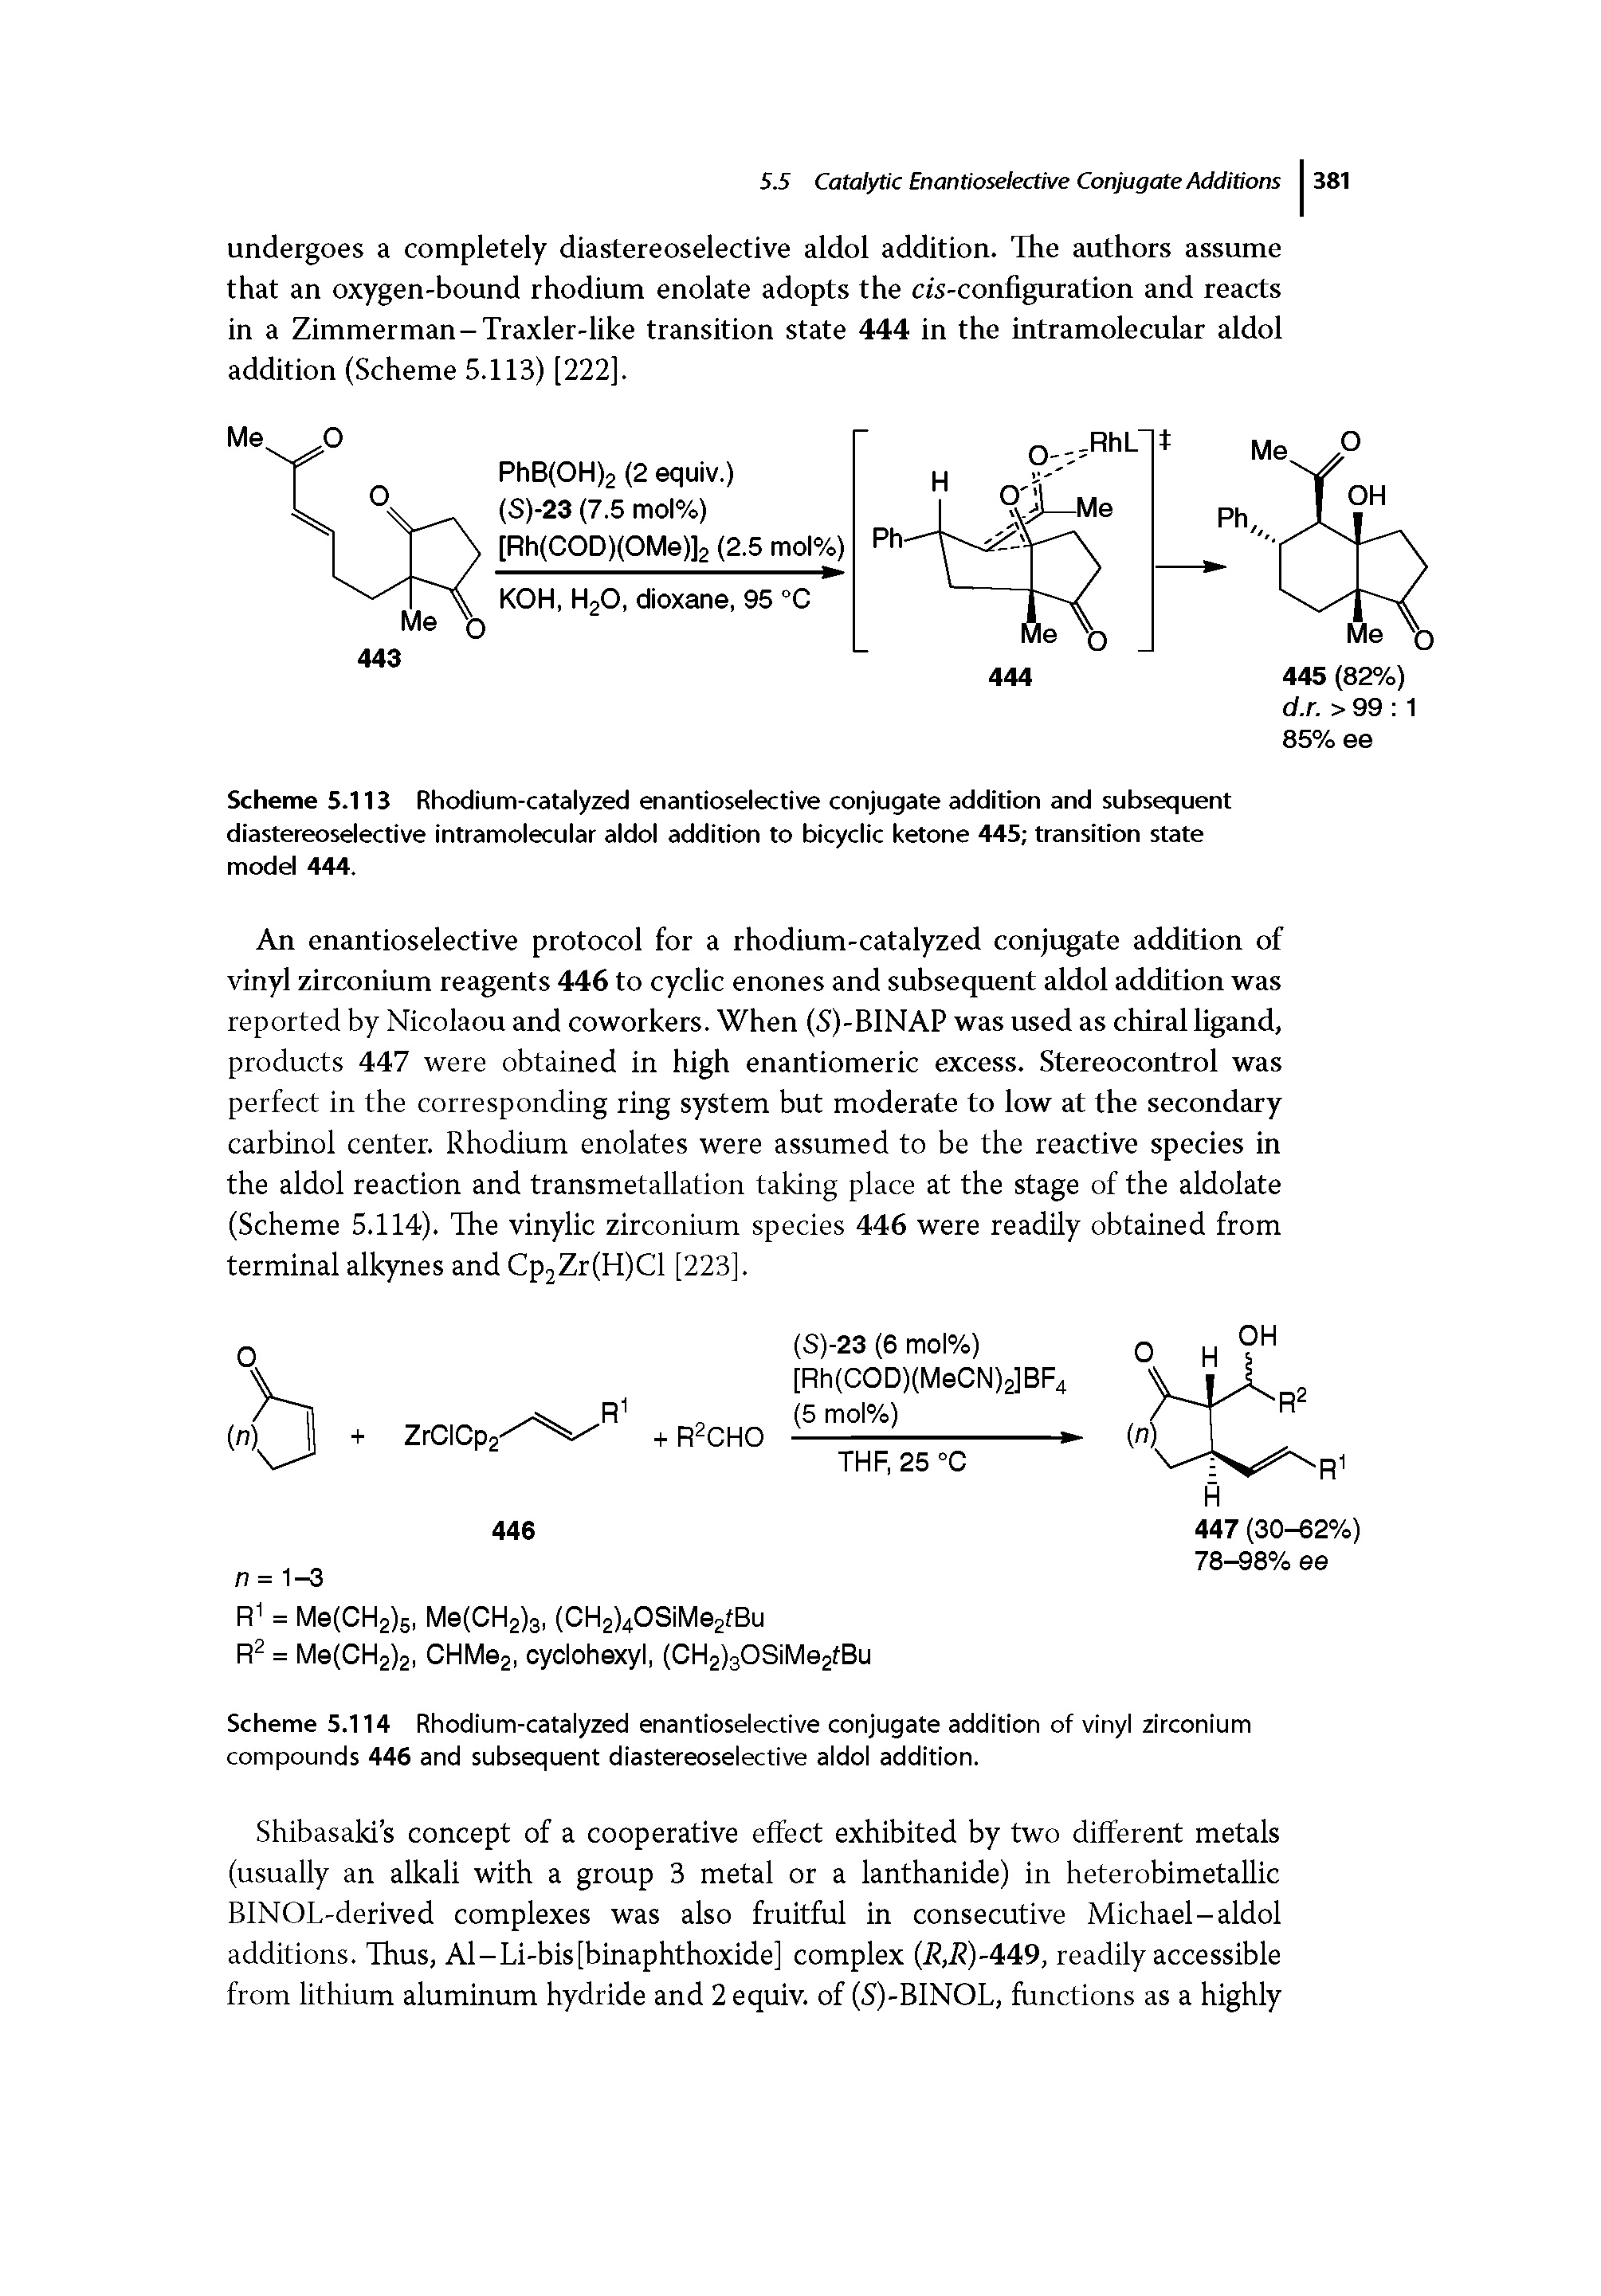 Scheme 5.114 Rhodium-catalyzed enantioselective conjugate addition of vinyl zirconium compounds 446 and subsequent diastereoselective aldol addition.